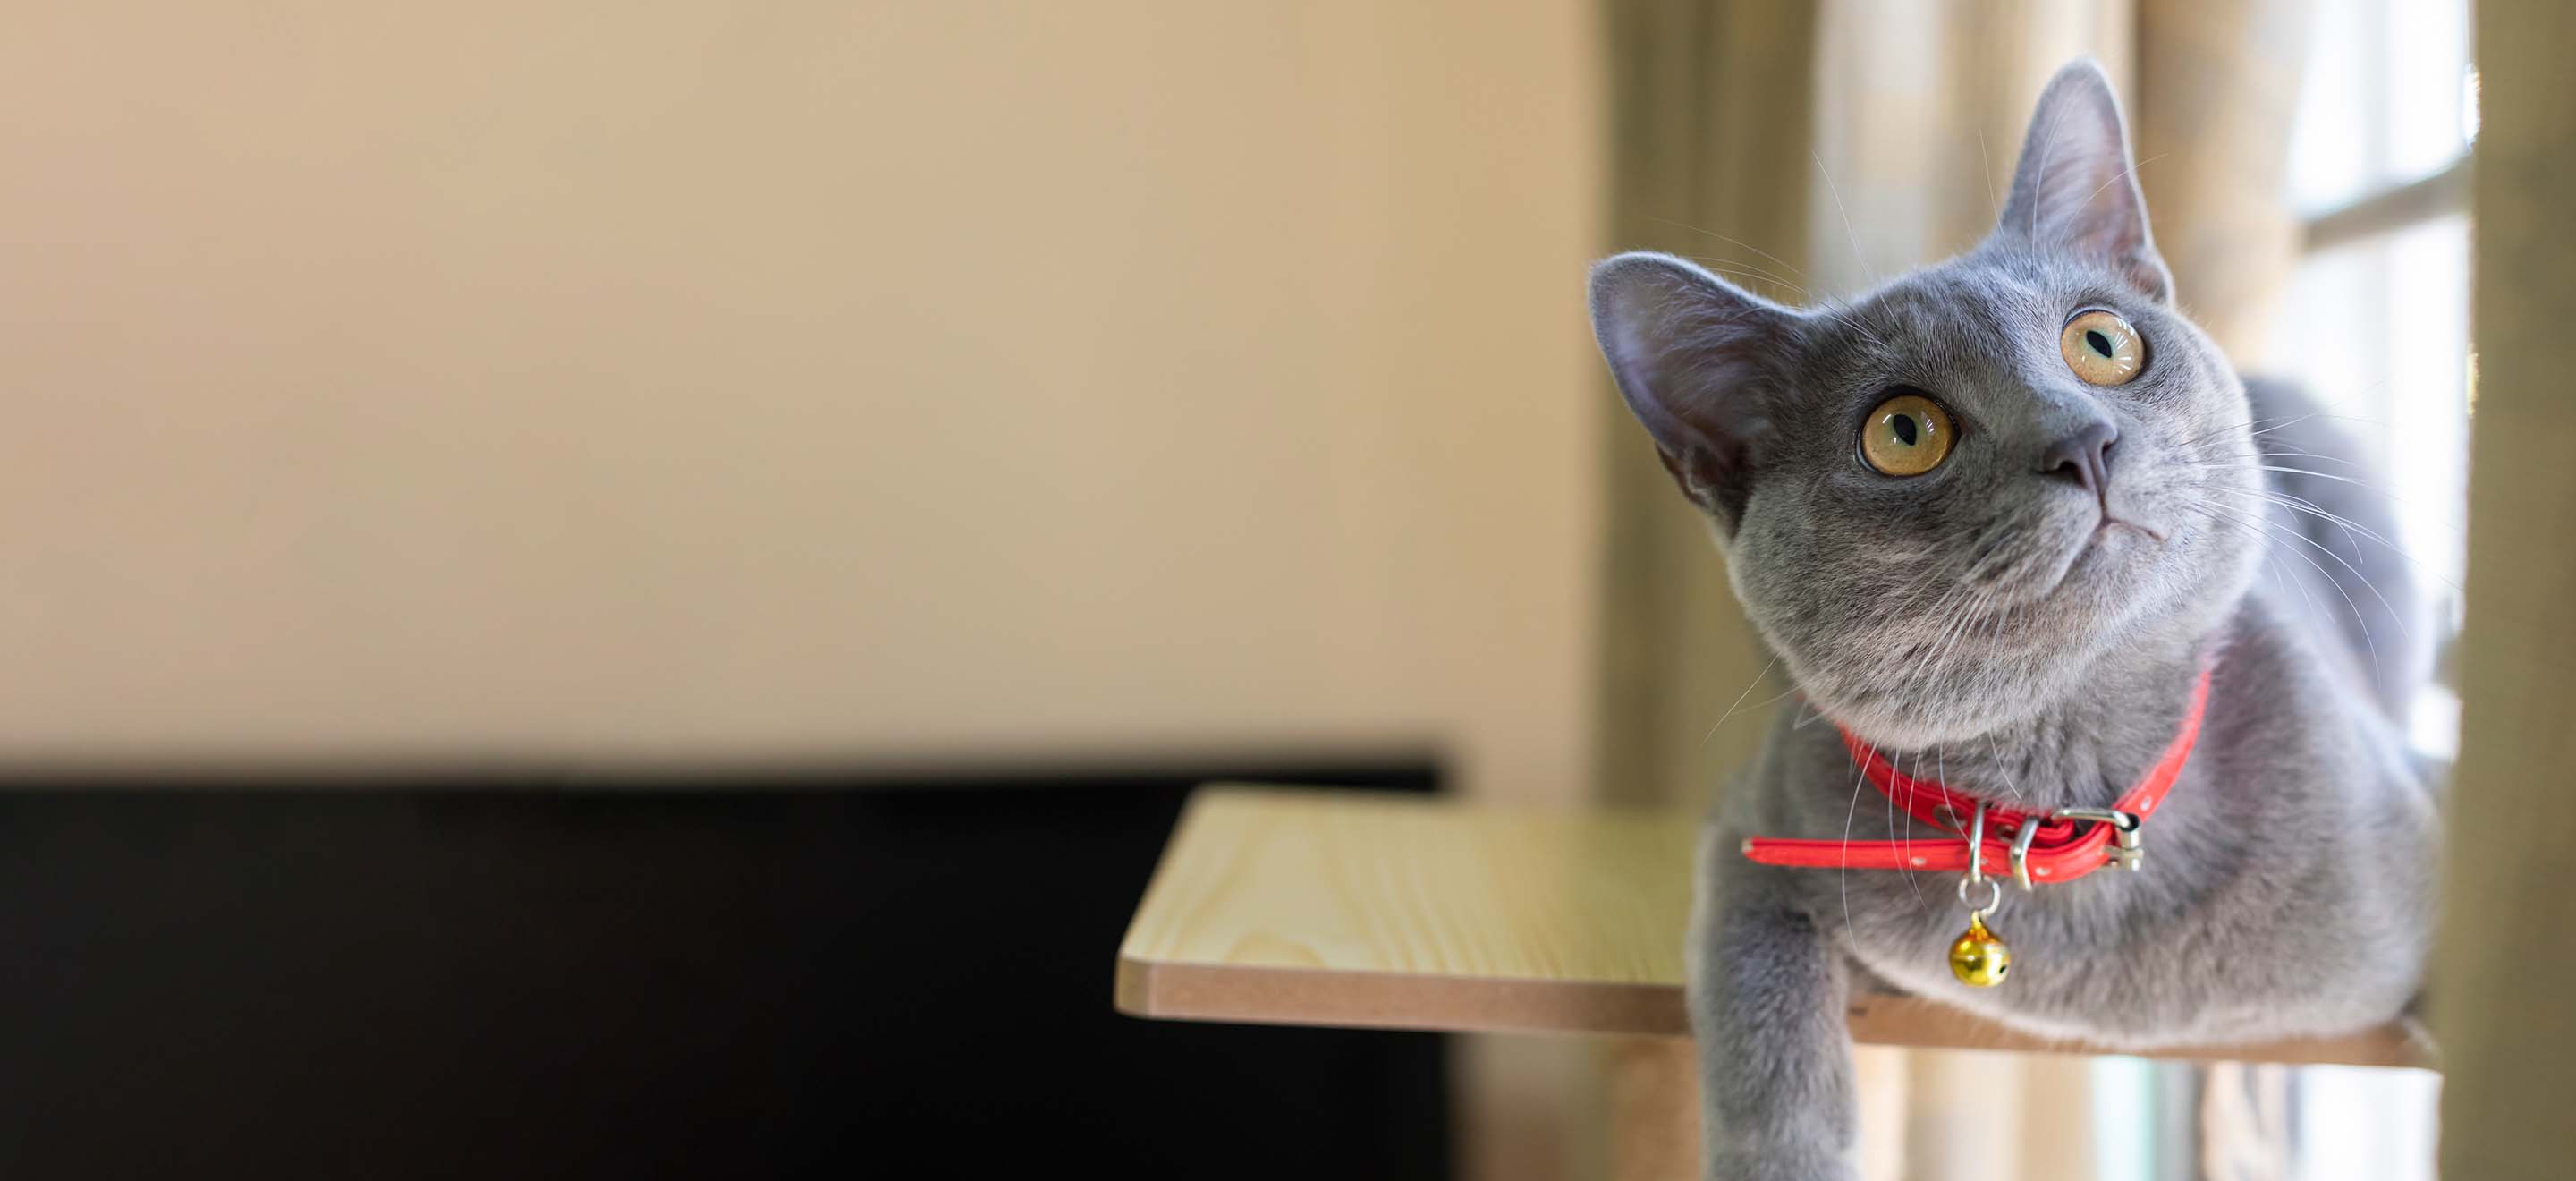 A Korat cat wearing a red collar and sitting on a wooden shelf in front of a bedroom window image